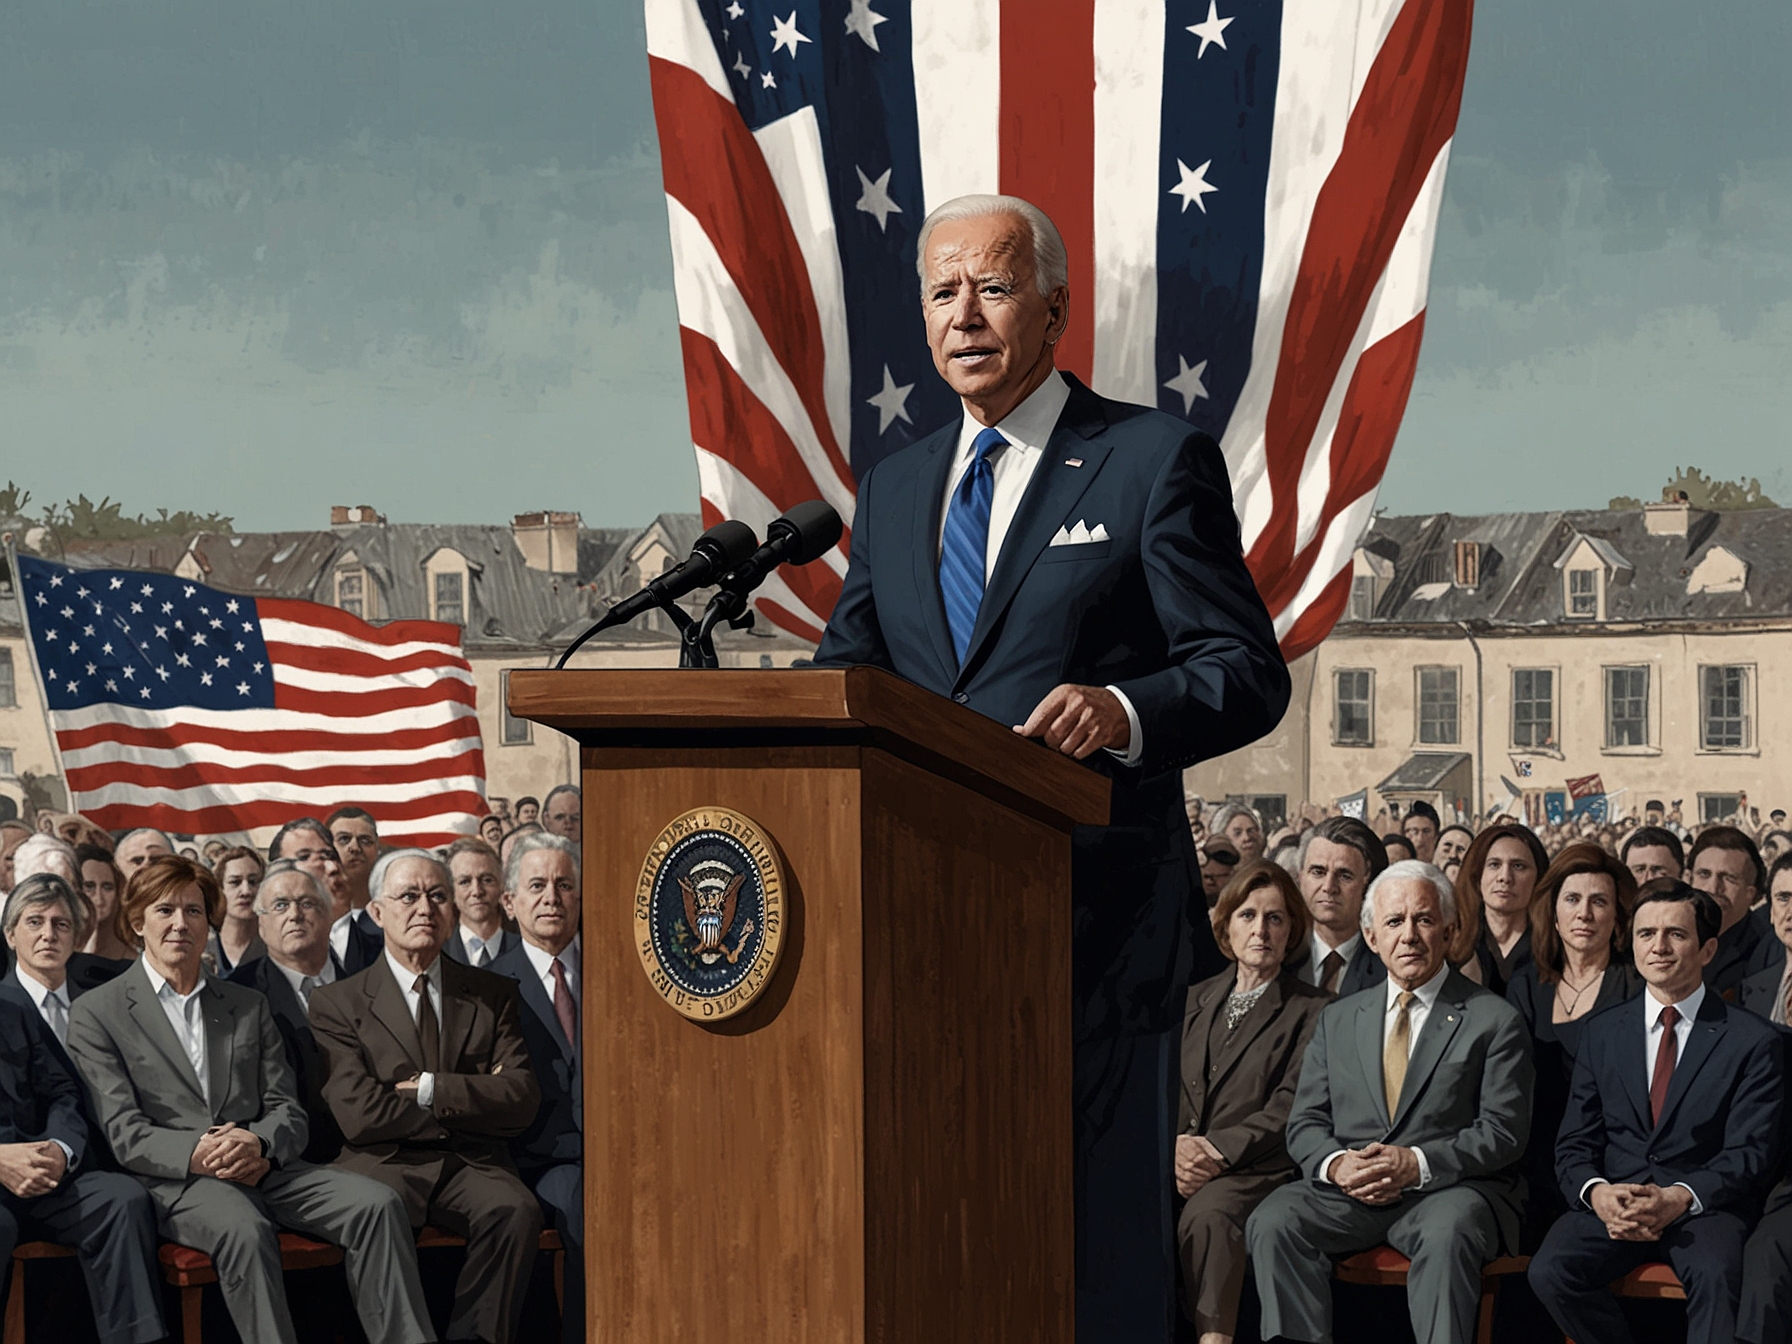 President Joe Biden addresses a crowd, announcing a new policy that grants deportation protection and work permits to spouses of U.S. citizens who have resided in the country for at least ten years.